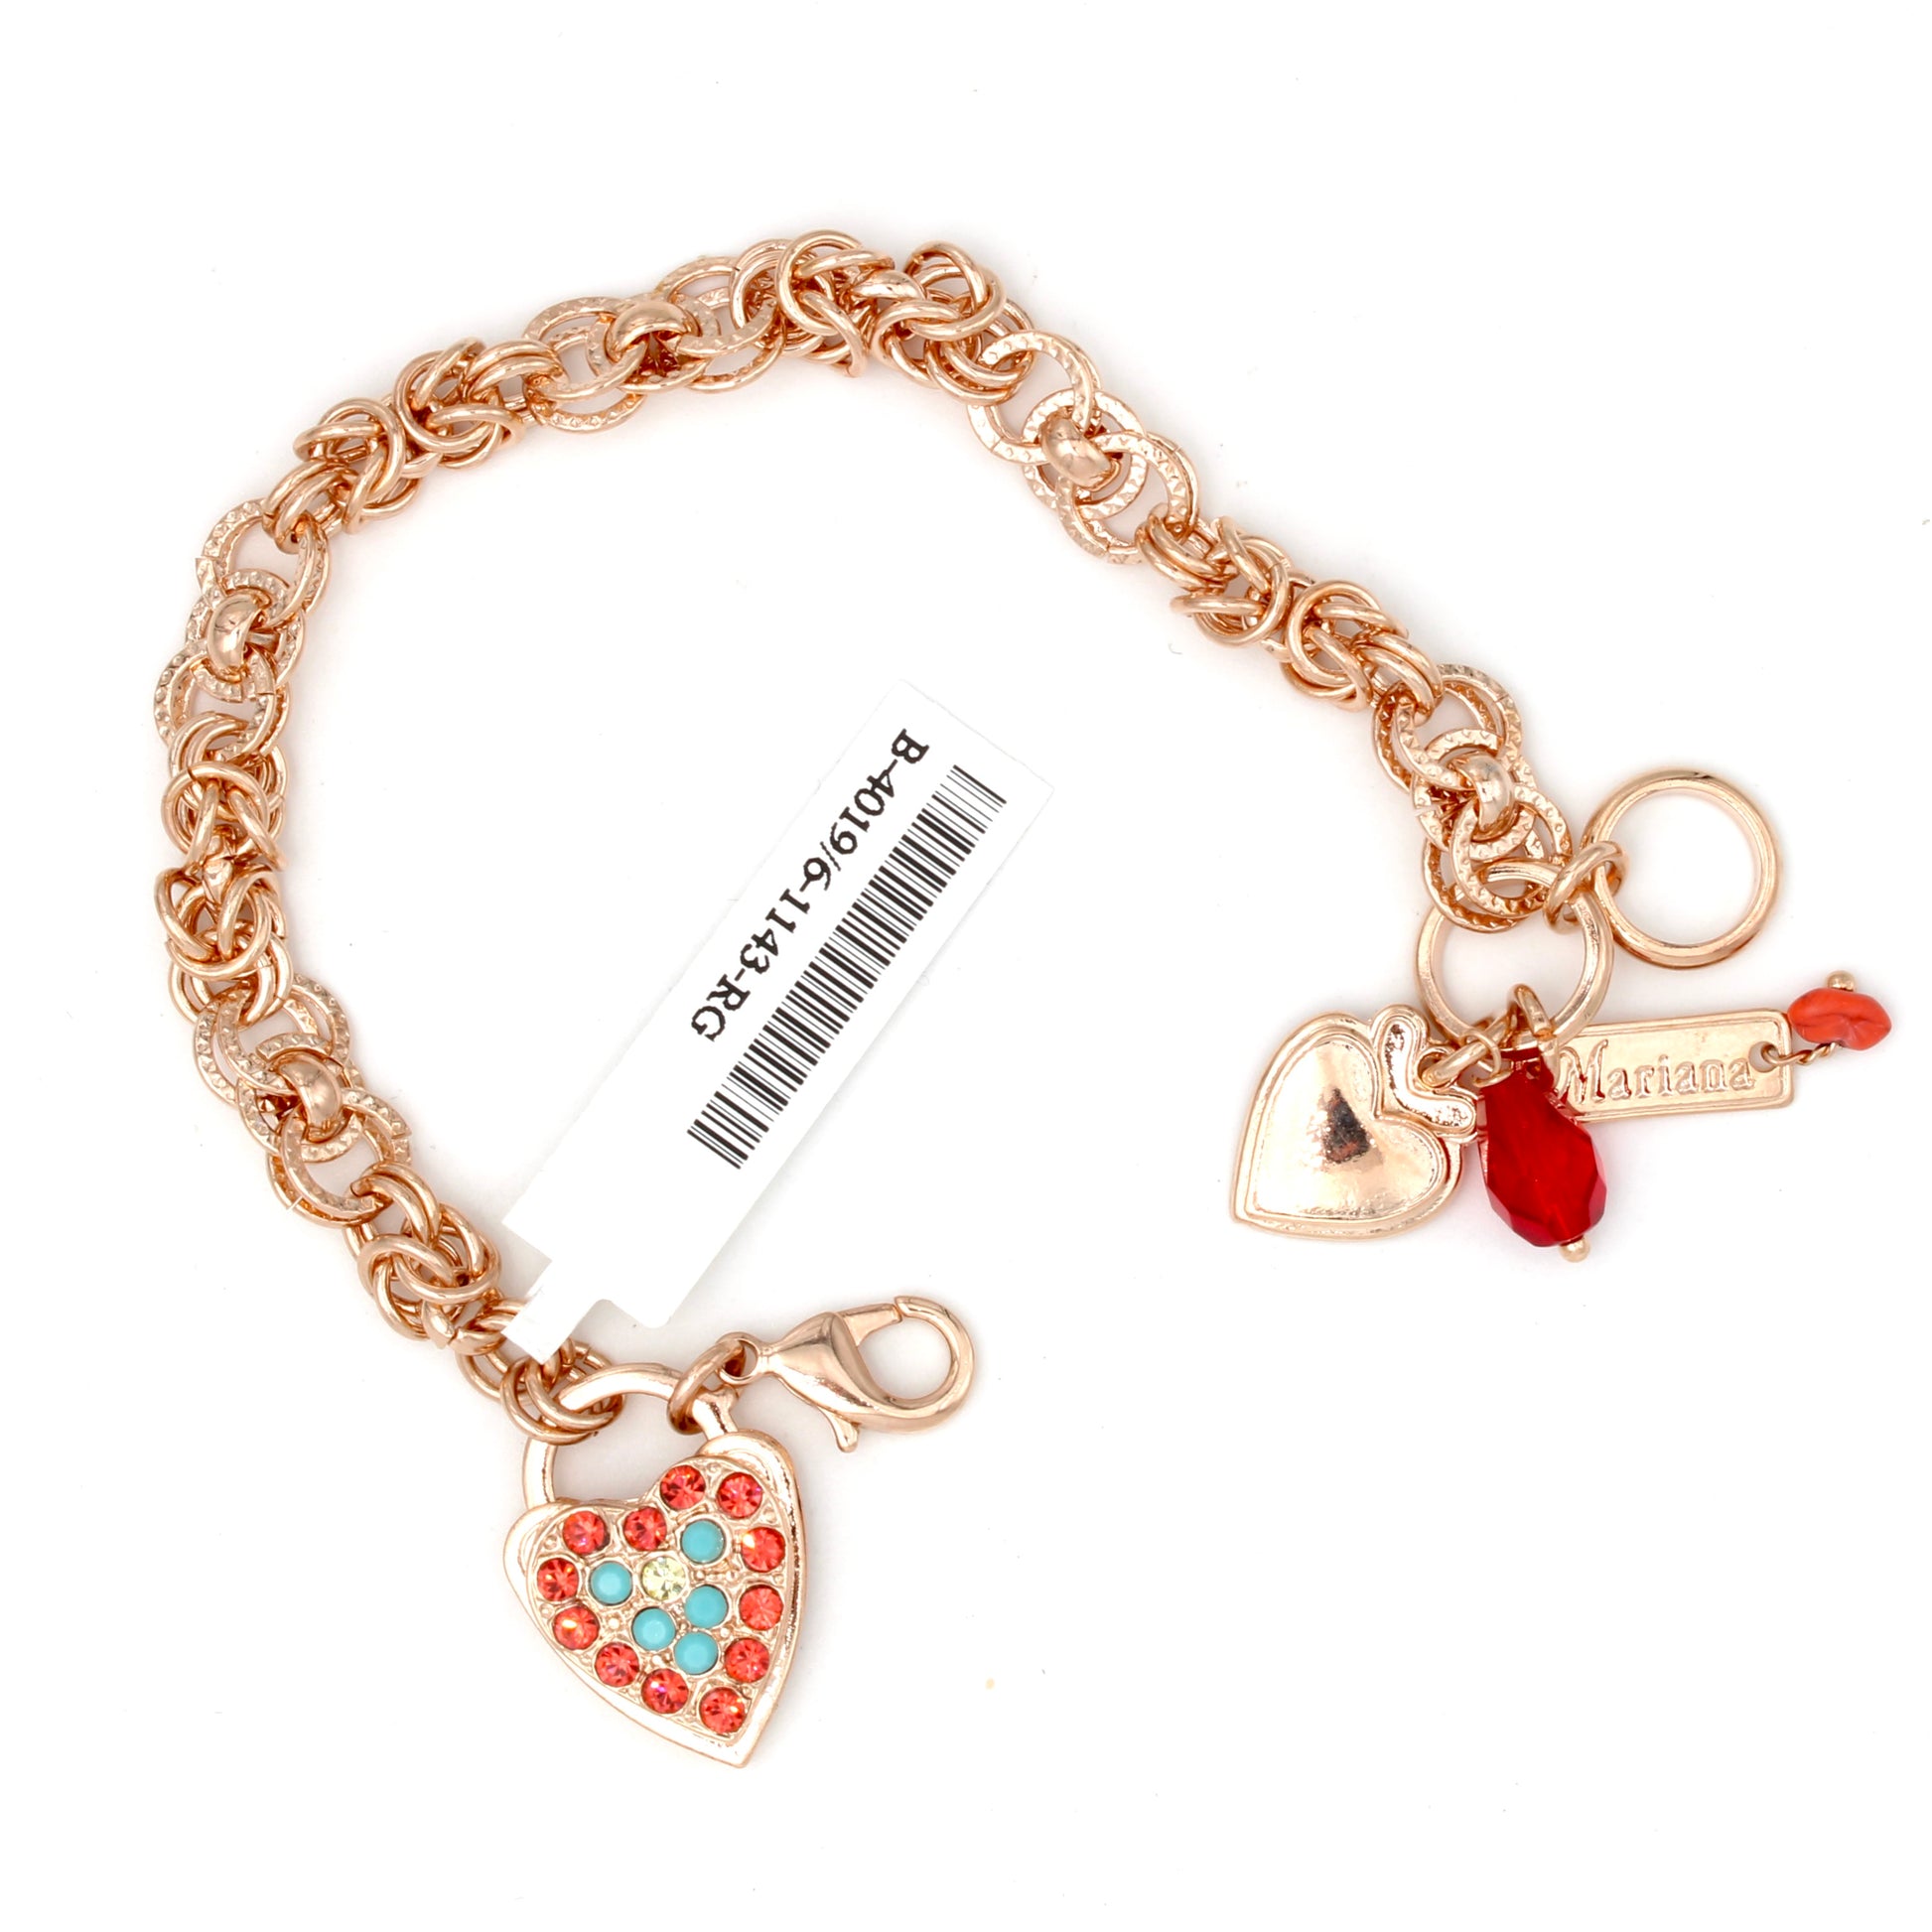 Rainbow Sherbet Collection Heart Bracelet in Rose Gold - MaryTyke's